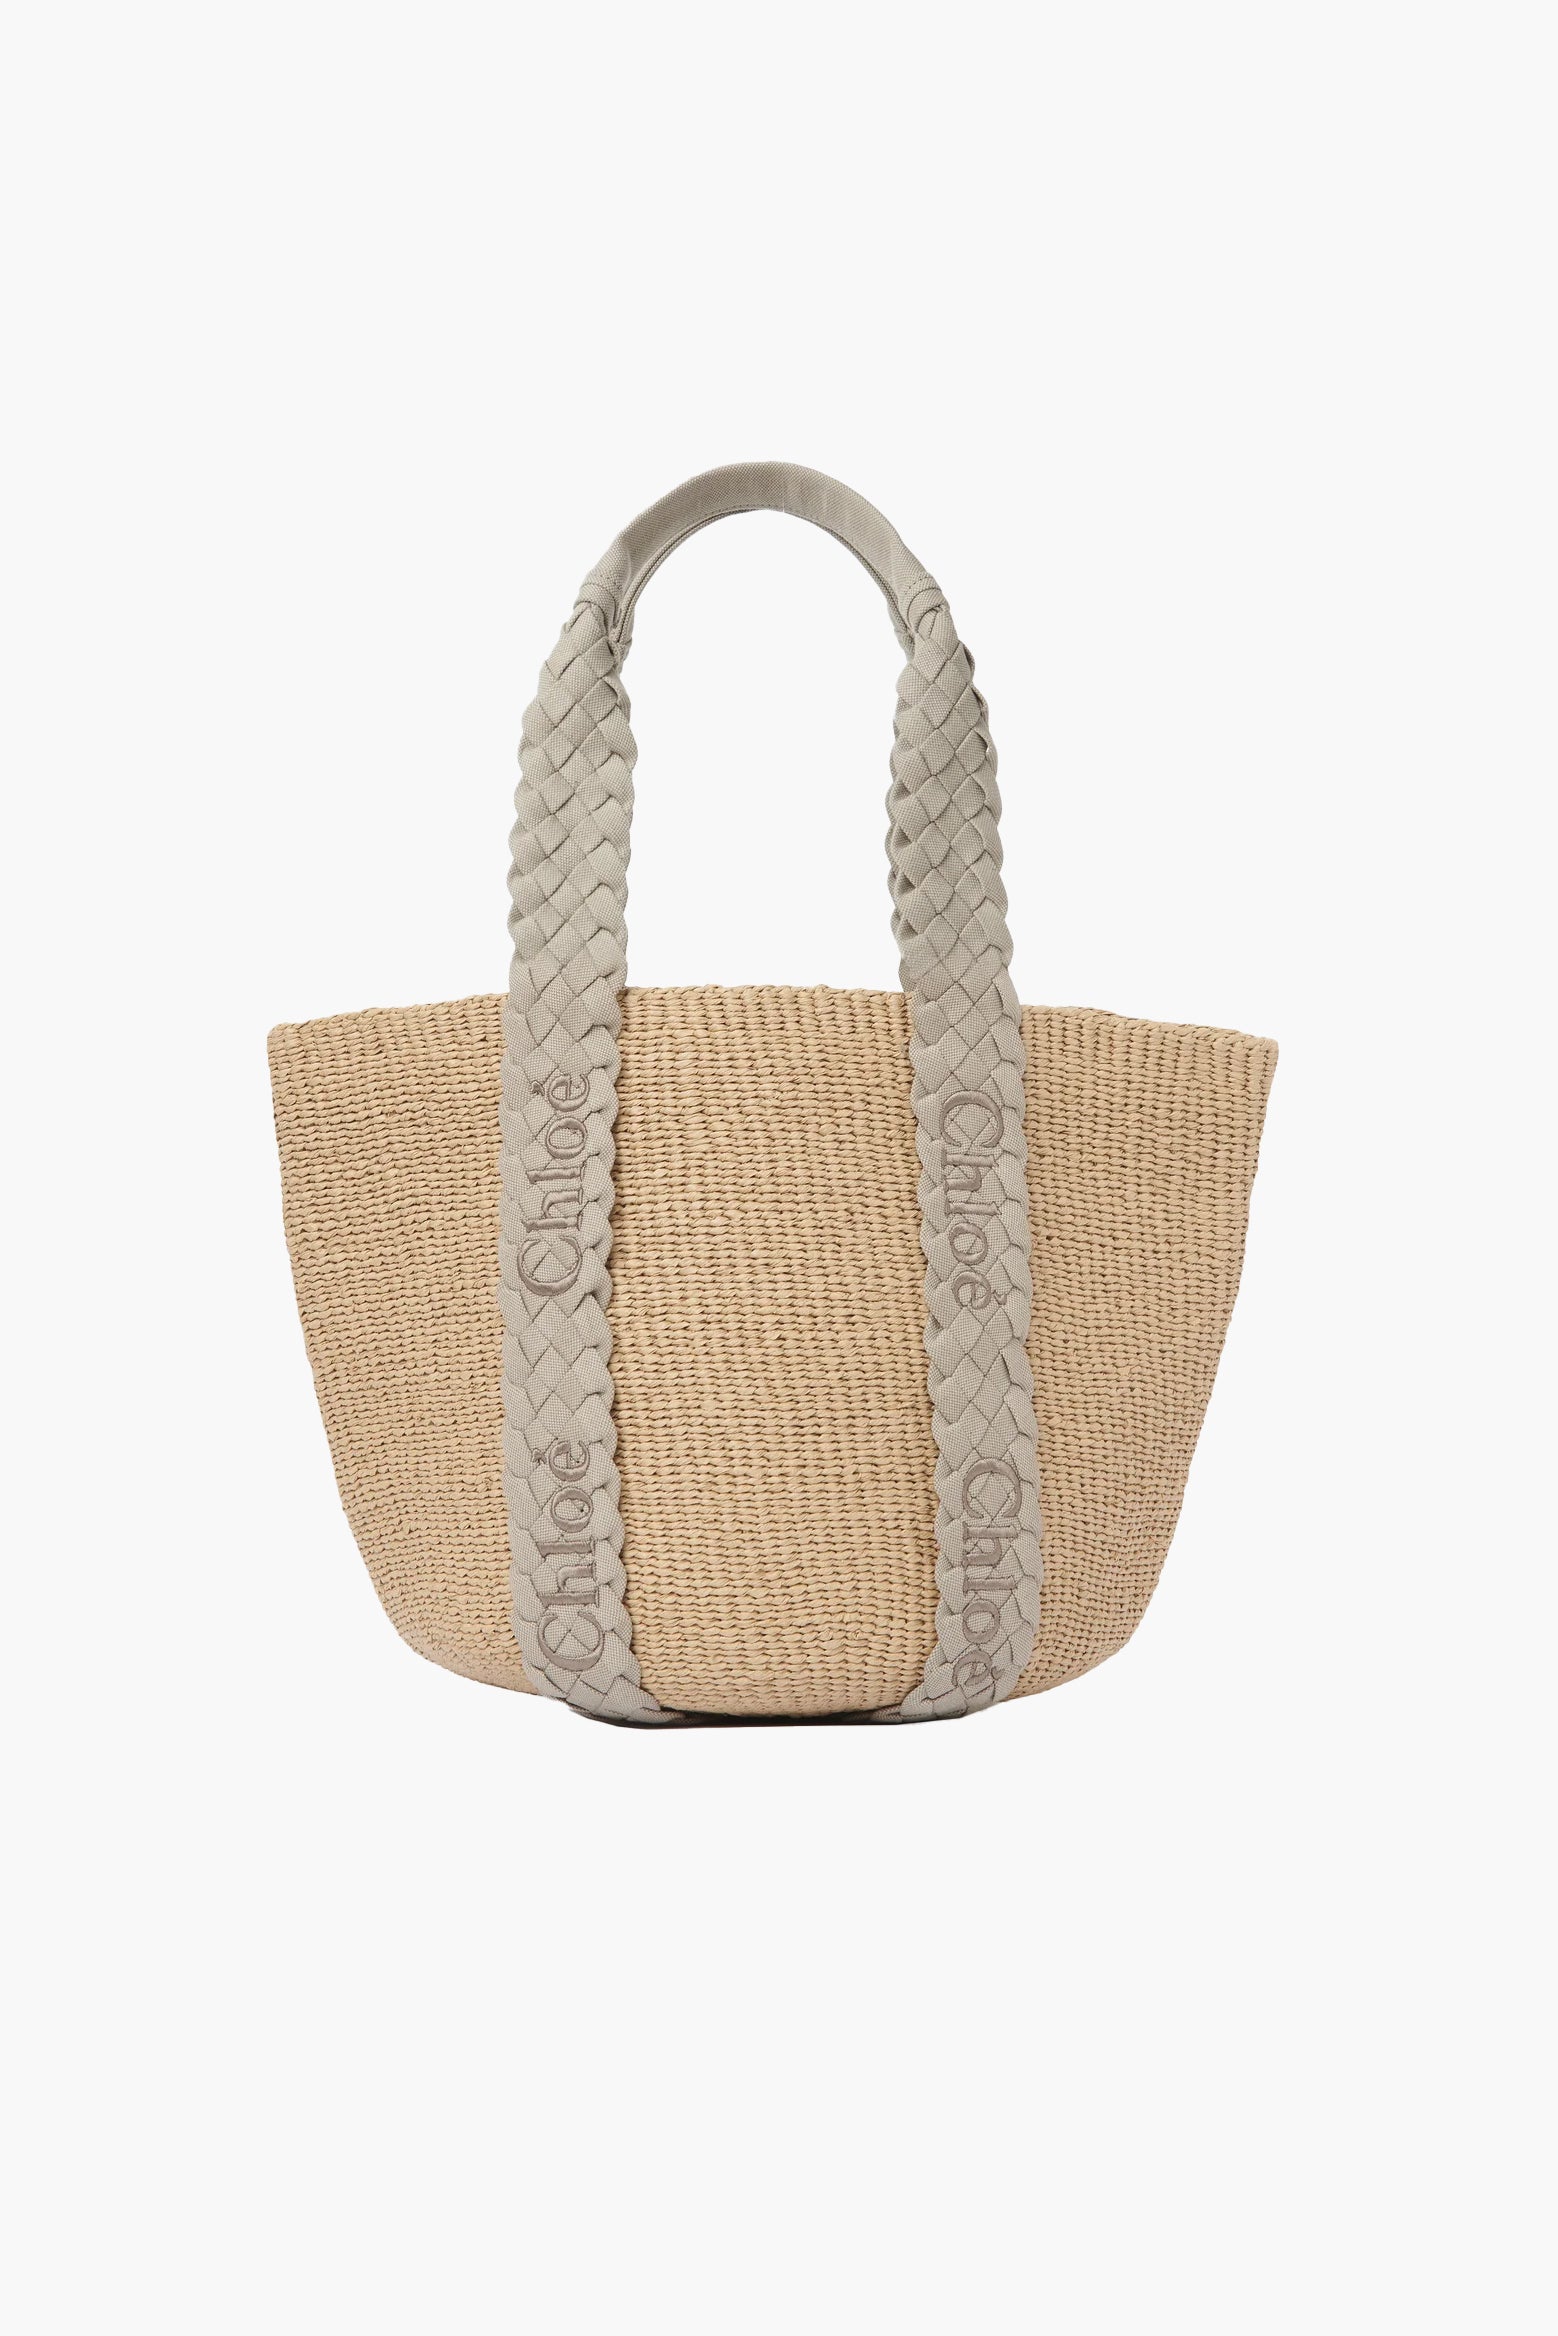 Chloe Woody Large Basket Bag in Pastel Grey available at The New Trend Australia. 